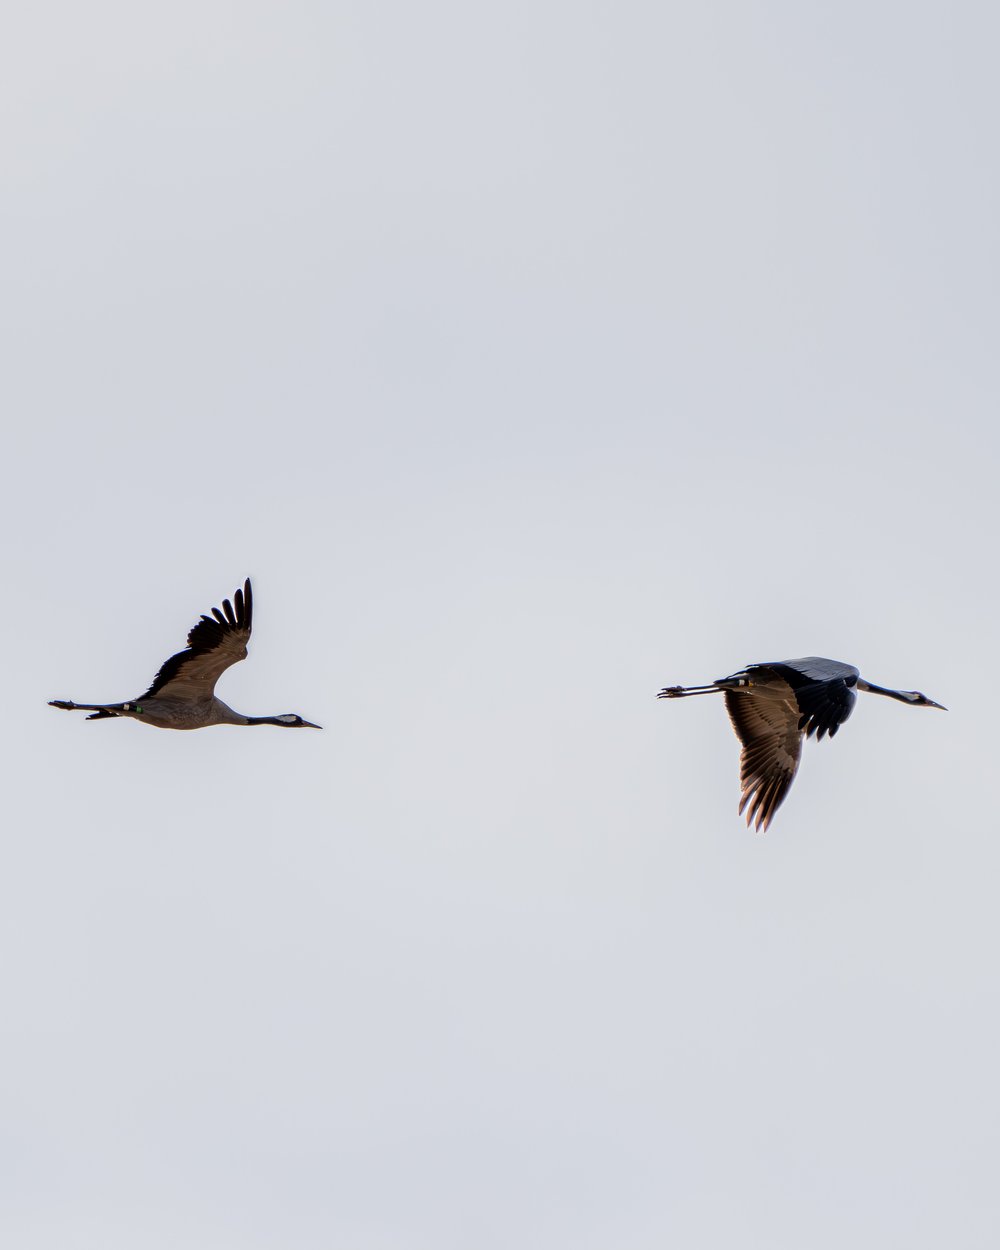 Common cranes flying at Athelney. (Picture by Medard Sandor)